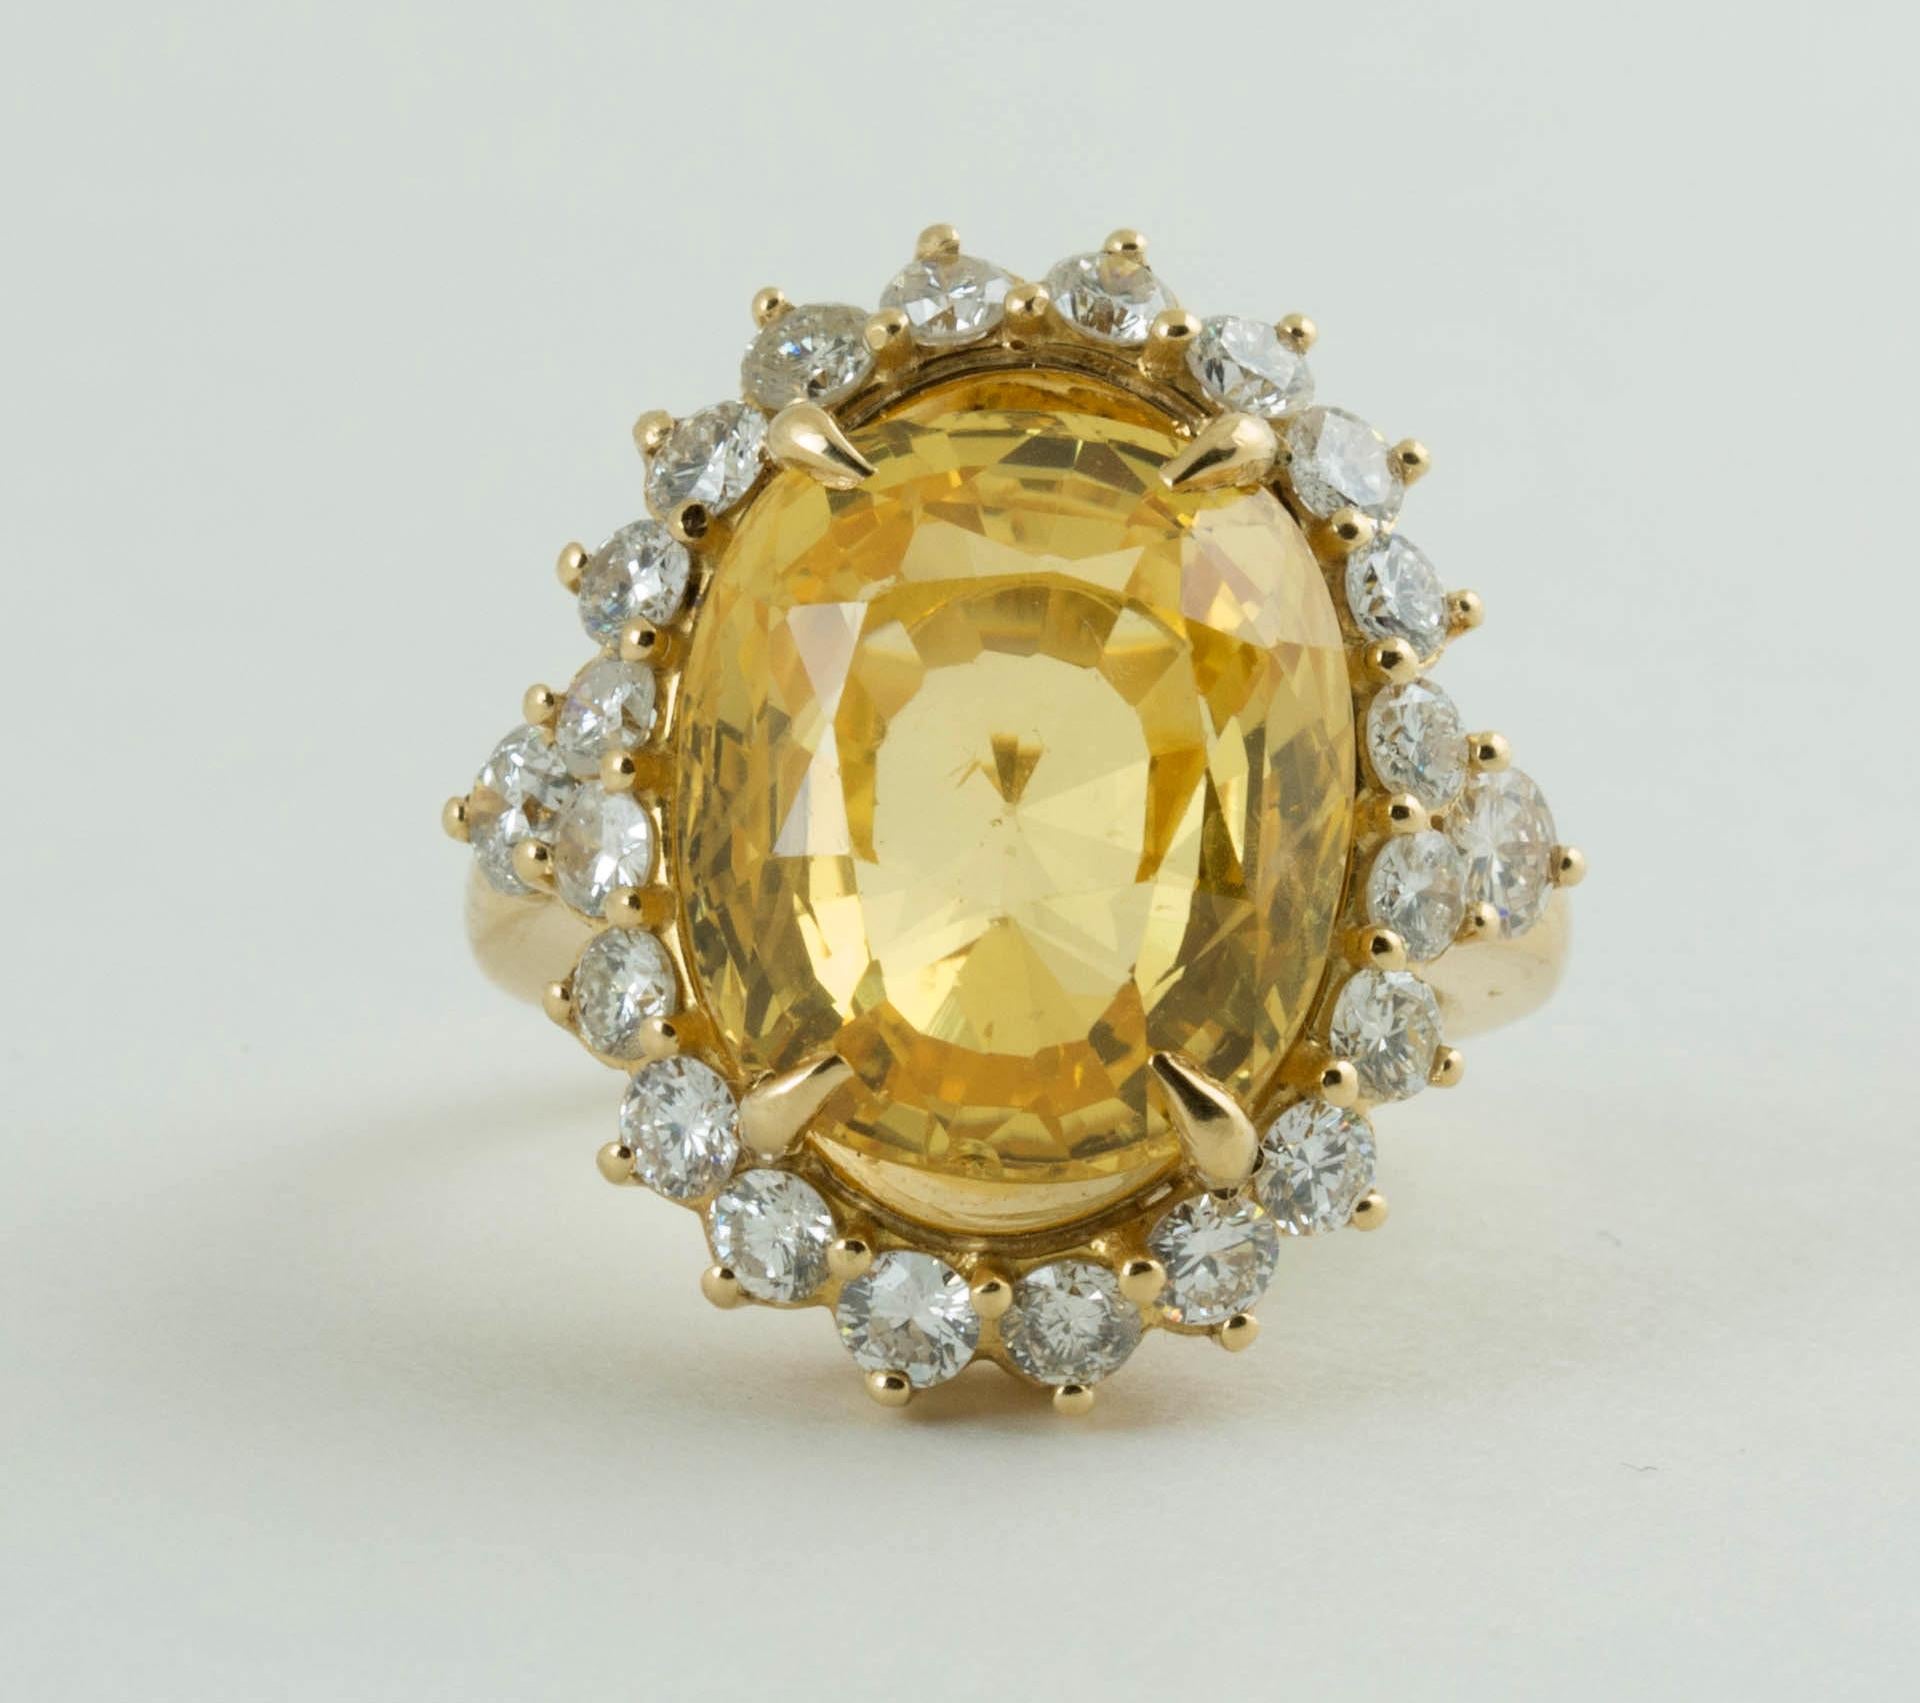 An antique 14 carat cushion mixed cut natural no heat yellow sapphire and diamond ring.
Size of sapphire is 14.5mm x 12.35mm x 8.15mm. it is medium tone, strong saturation, yellow hue. come with Swiss Gemological Institute report #107813. 
There are